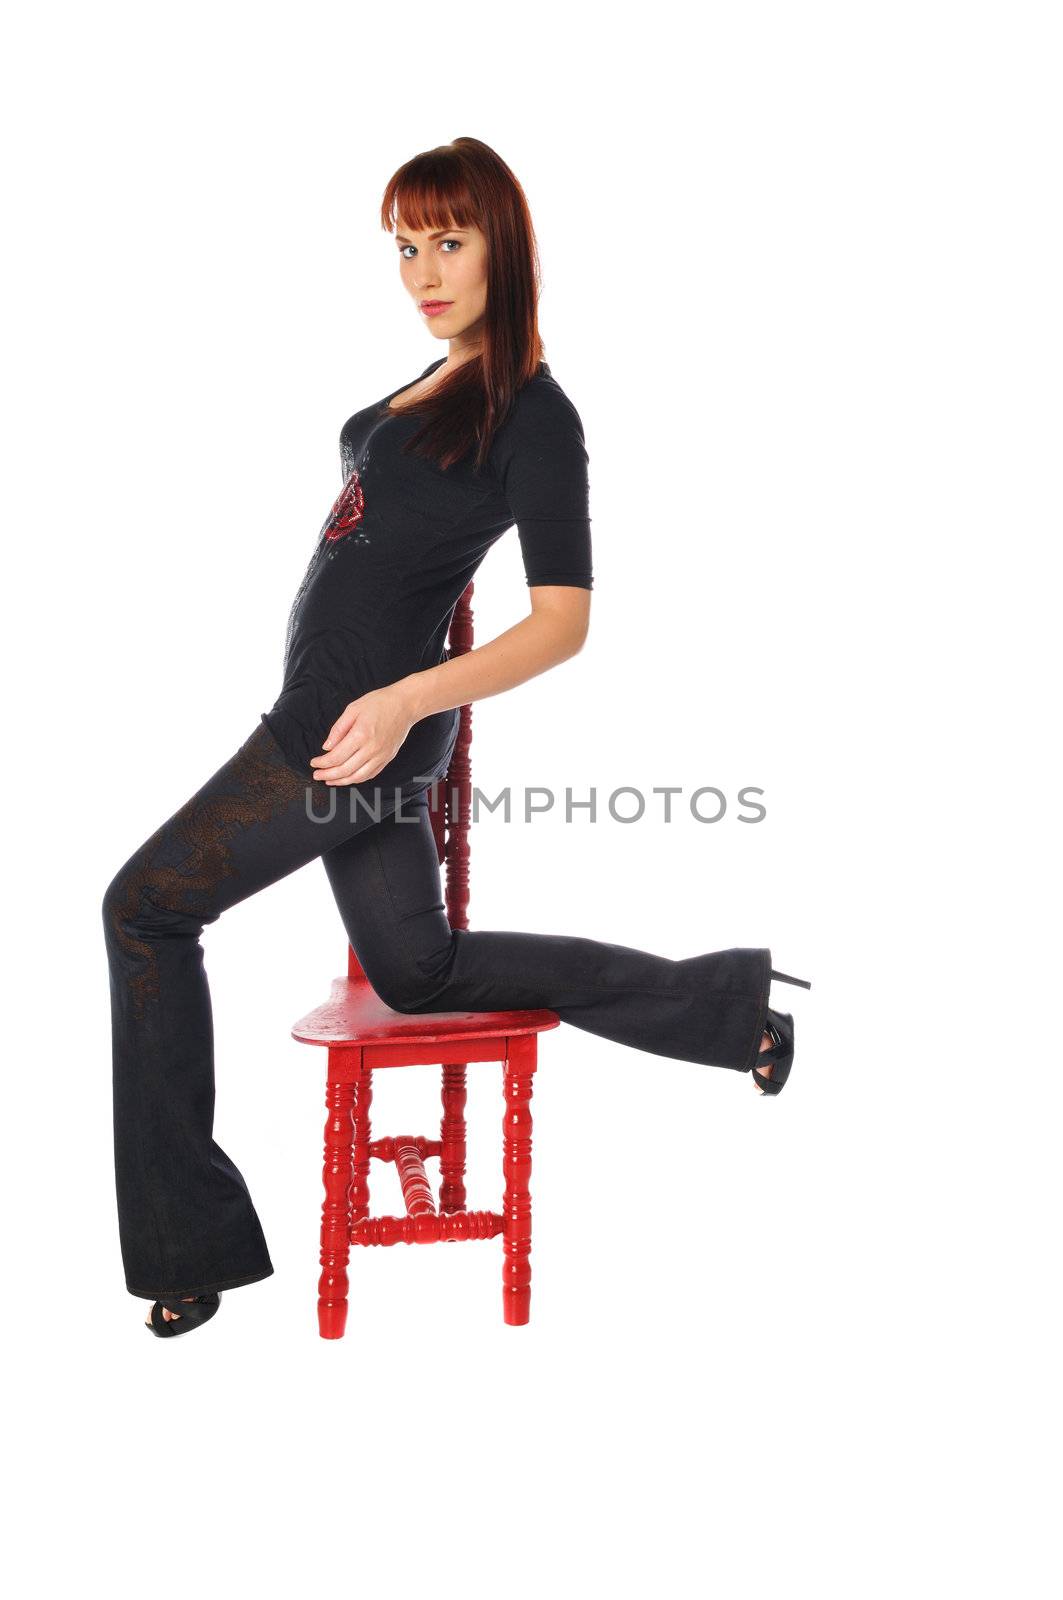 attractive owman with a red chair by PDImages